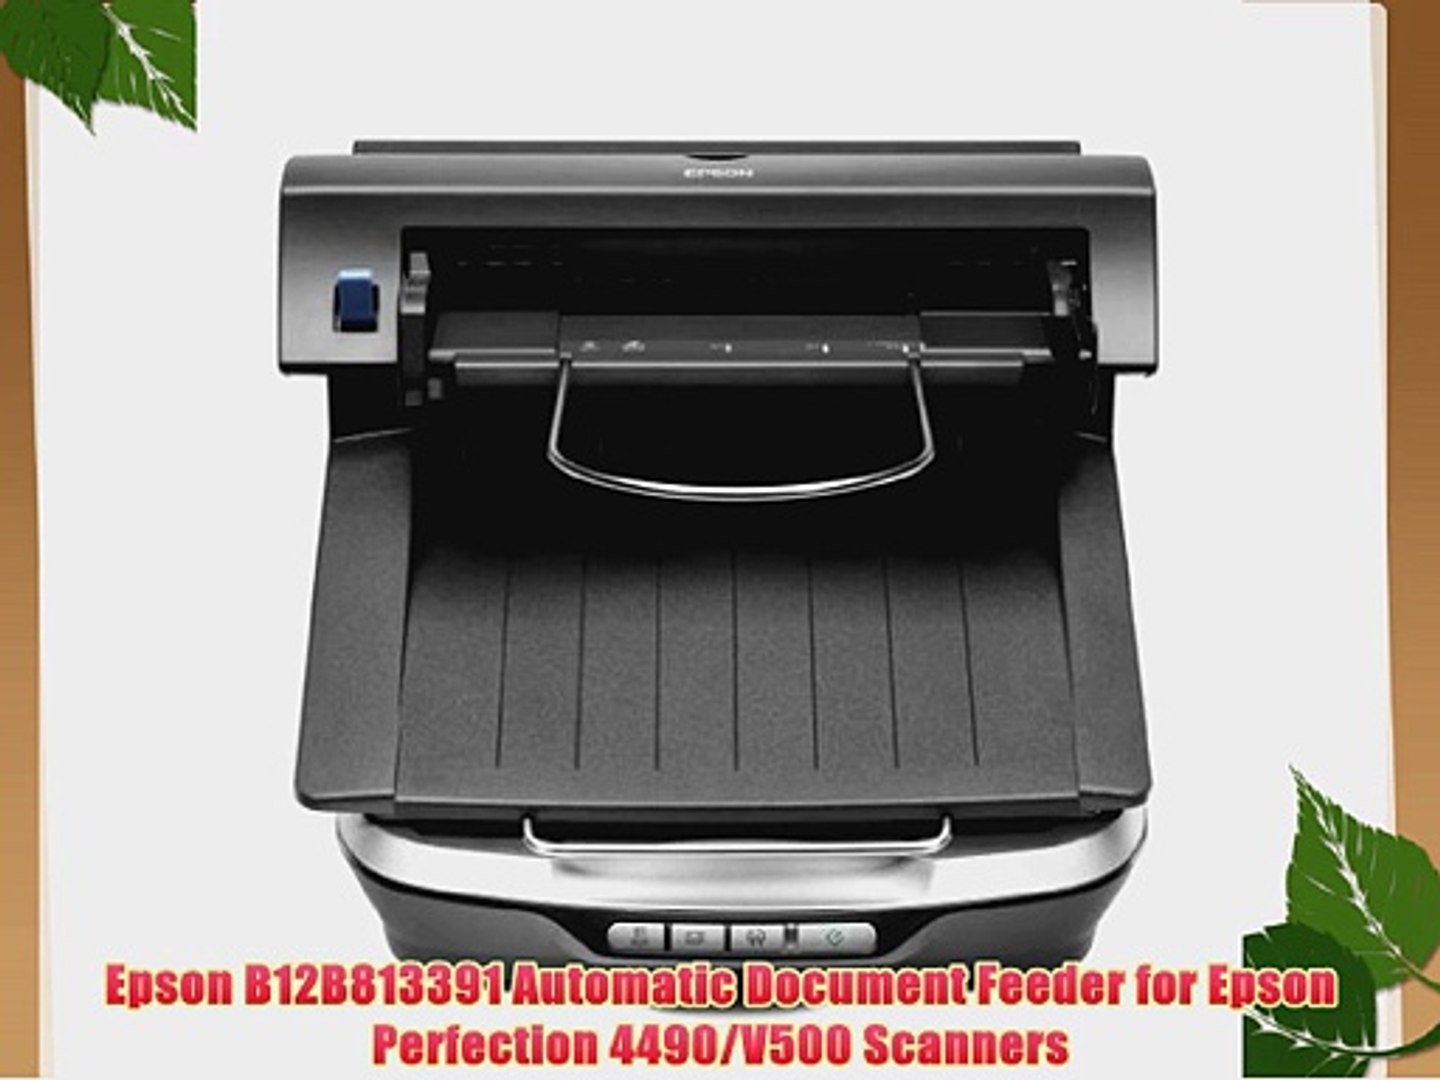 Epson B12B813391 Automatic Document Feeder for Epson Perfection 4490/V500  Scanners - video Dailymotion